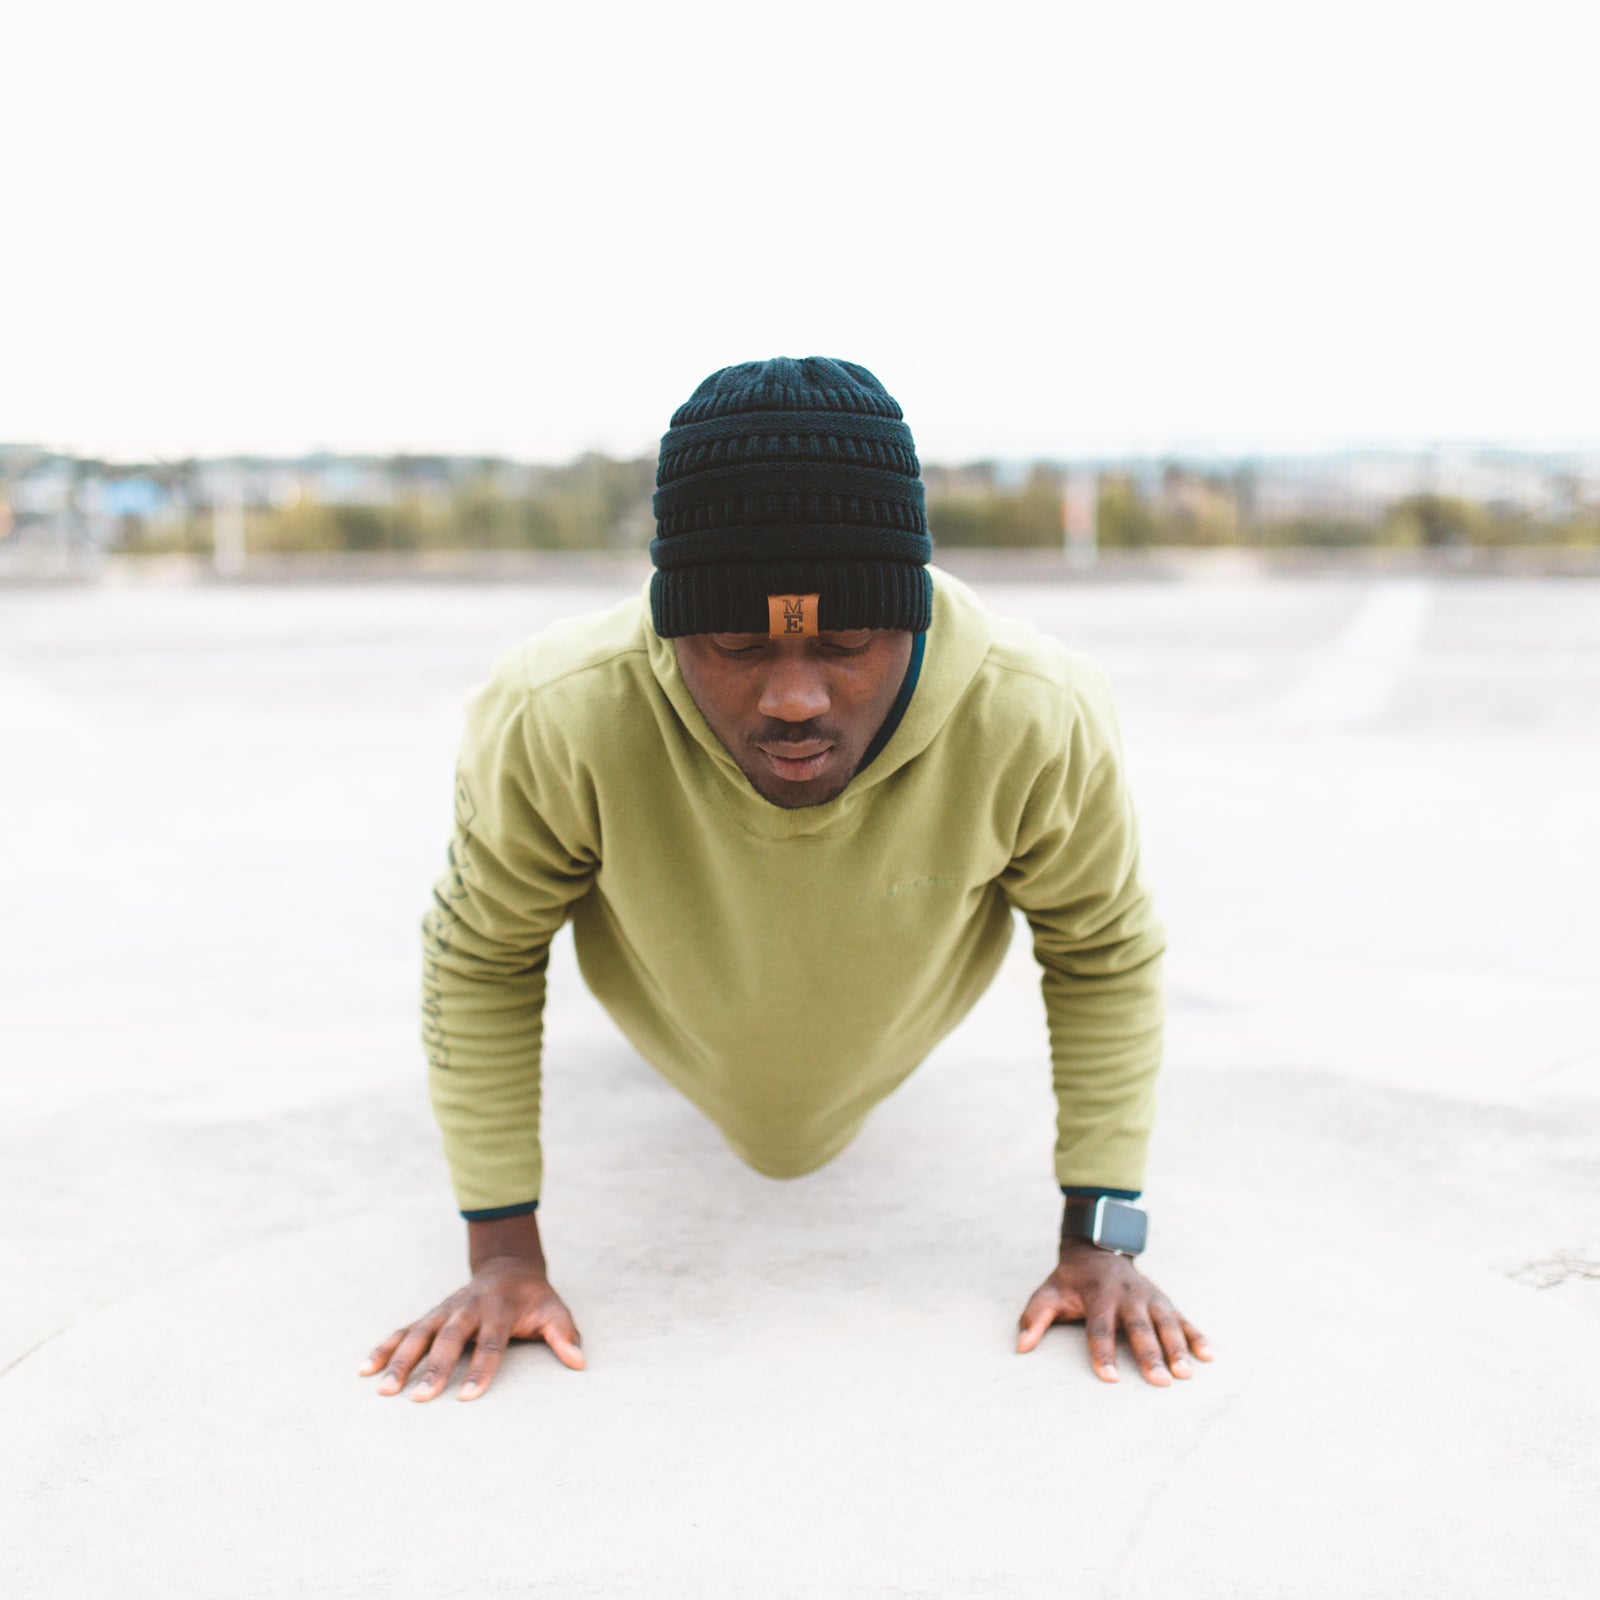 Should You Day? and Every Do Push-Ups Sit-Ups